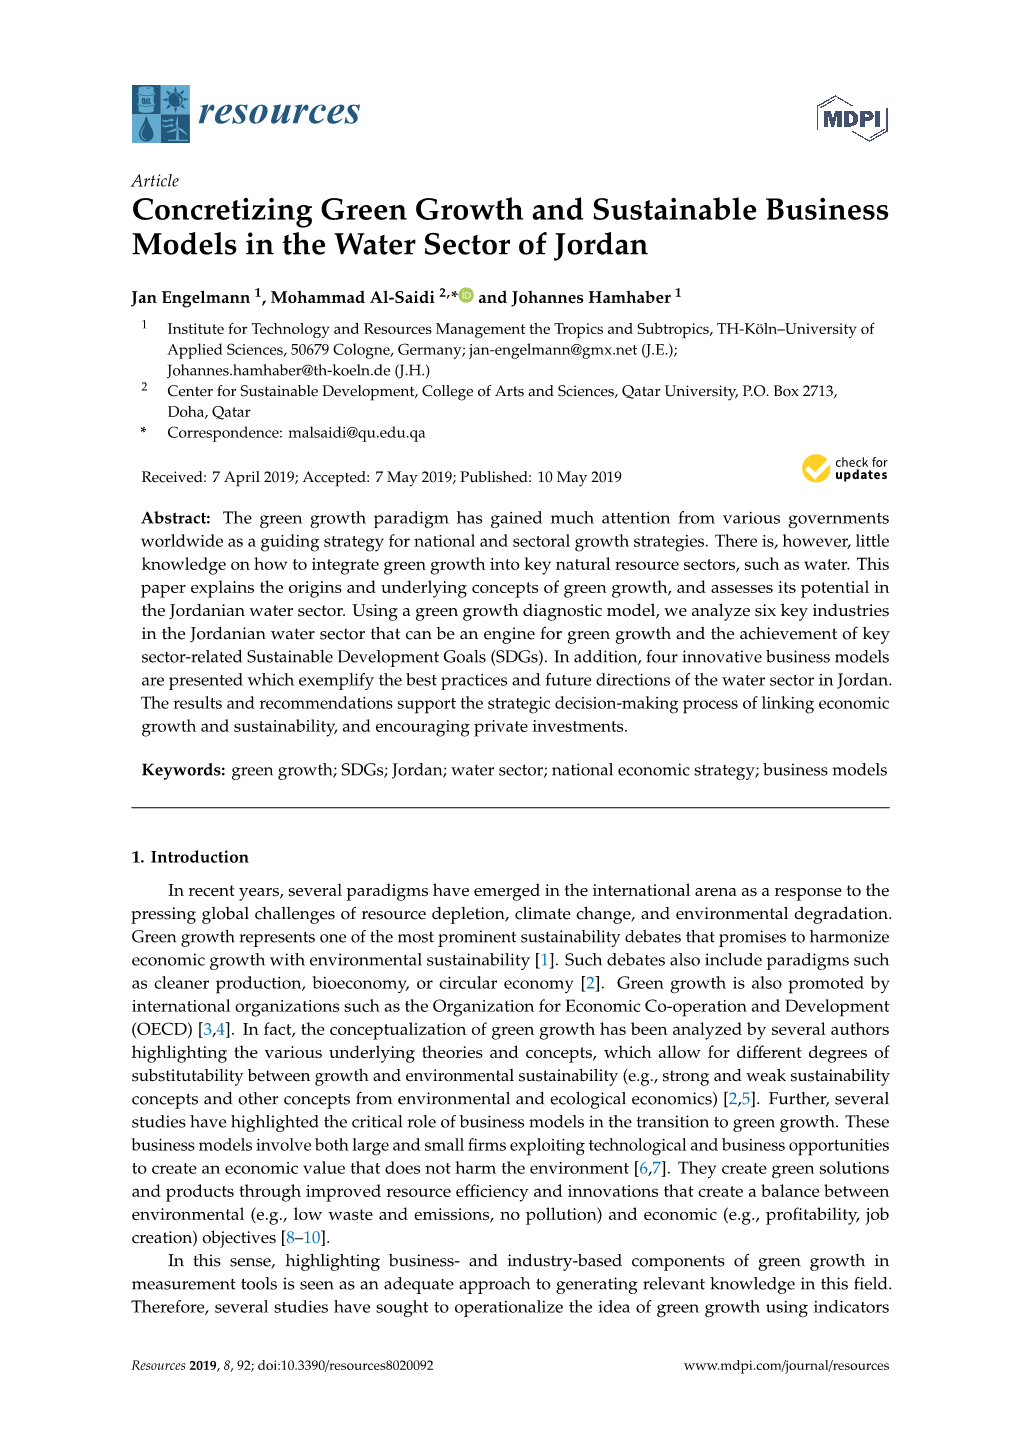 Concretizing Green Growth and Sustainable Business Models in the Water Sector of Jordan